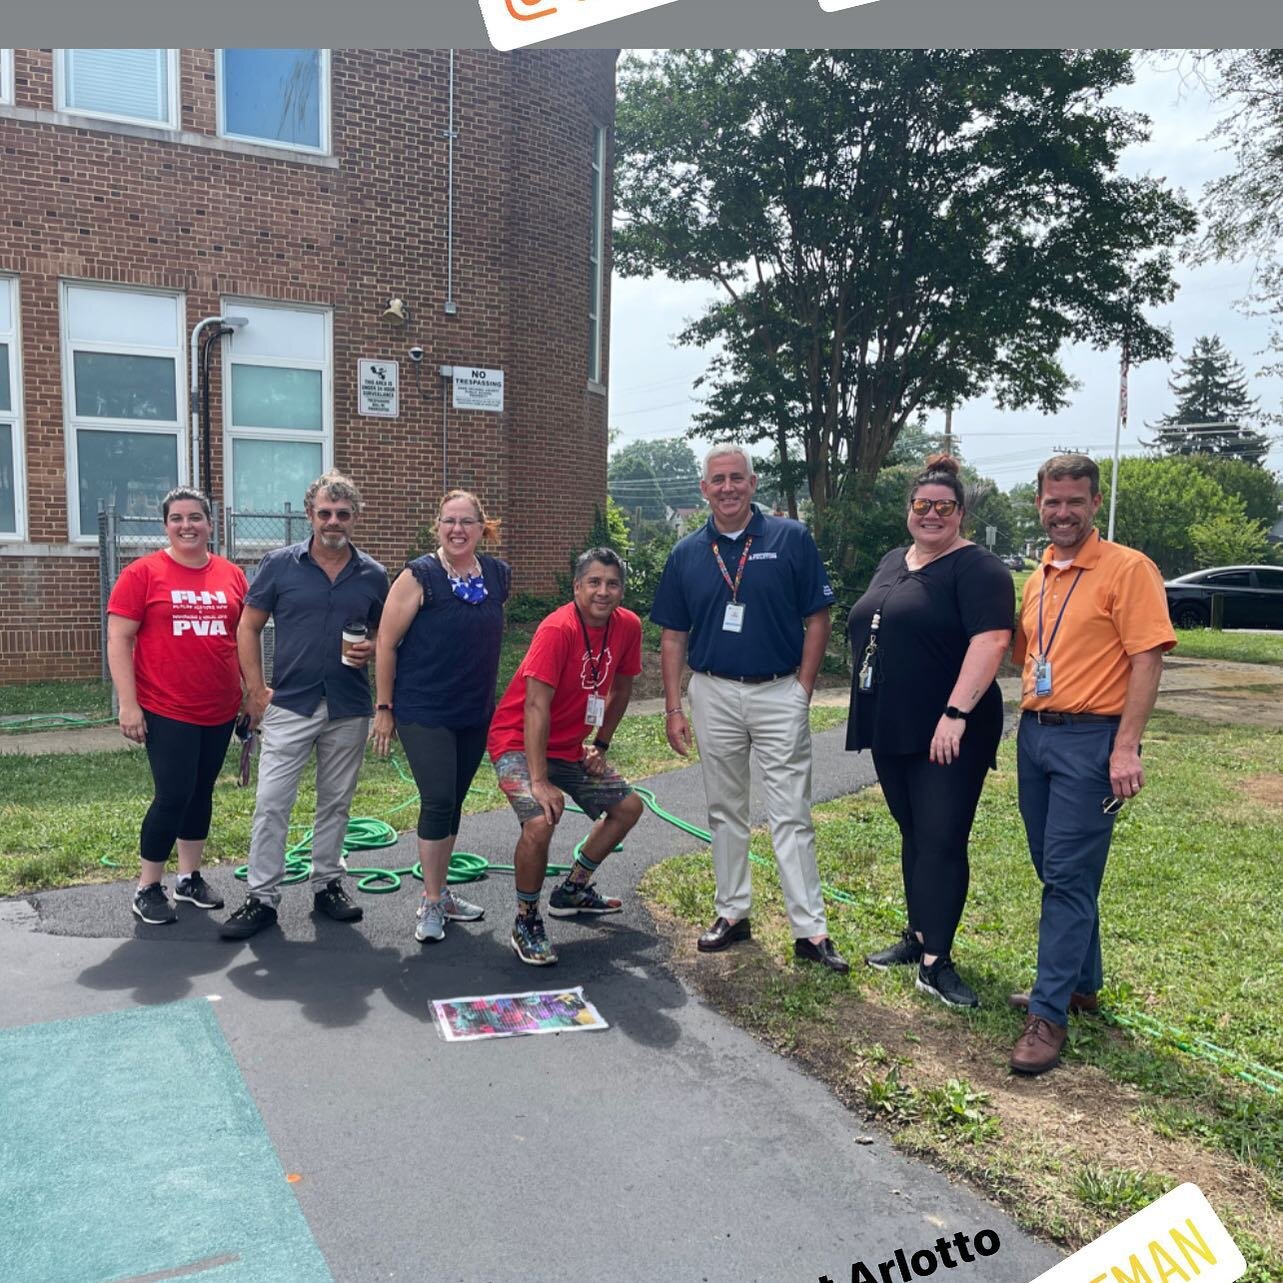 FHN&rsquo;s @jahru w/ @pva.aacps&rsquo;s @jjerrell82 
@cityofannapolismd&rsquo;s Brian Cahalan,  @delegateheatherbagnall, Superintendent George Arlotto, @jillianlee5678 + @davidfkauffman at the FHN x PVA Mural Project at Studio 39 in Annapolis MD